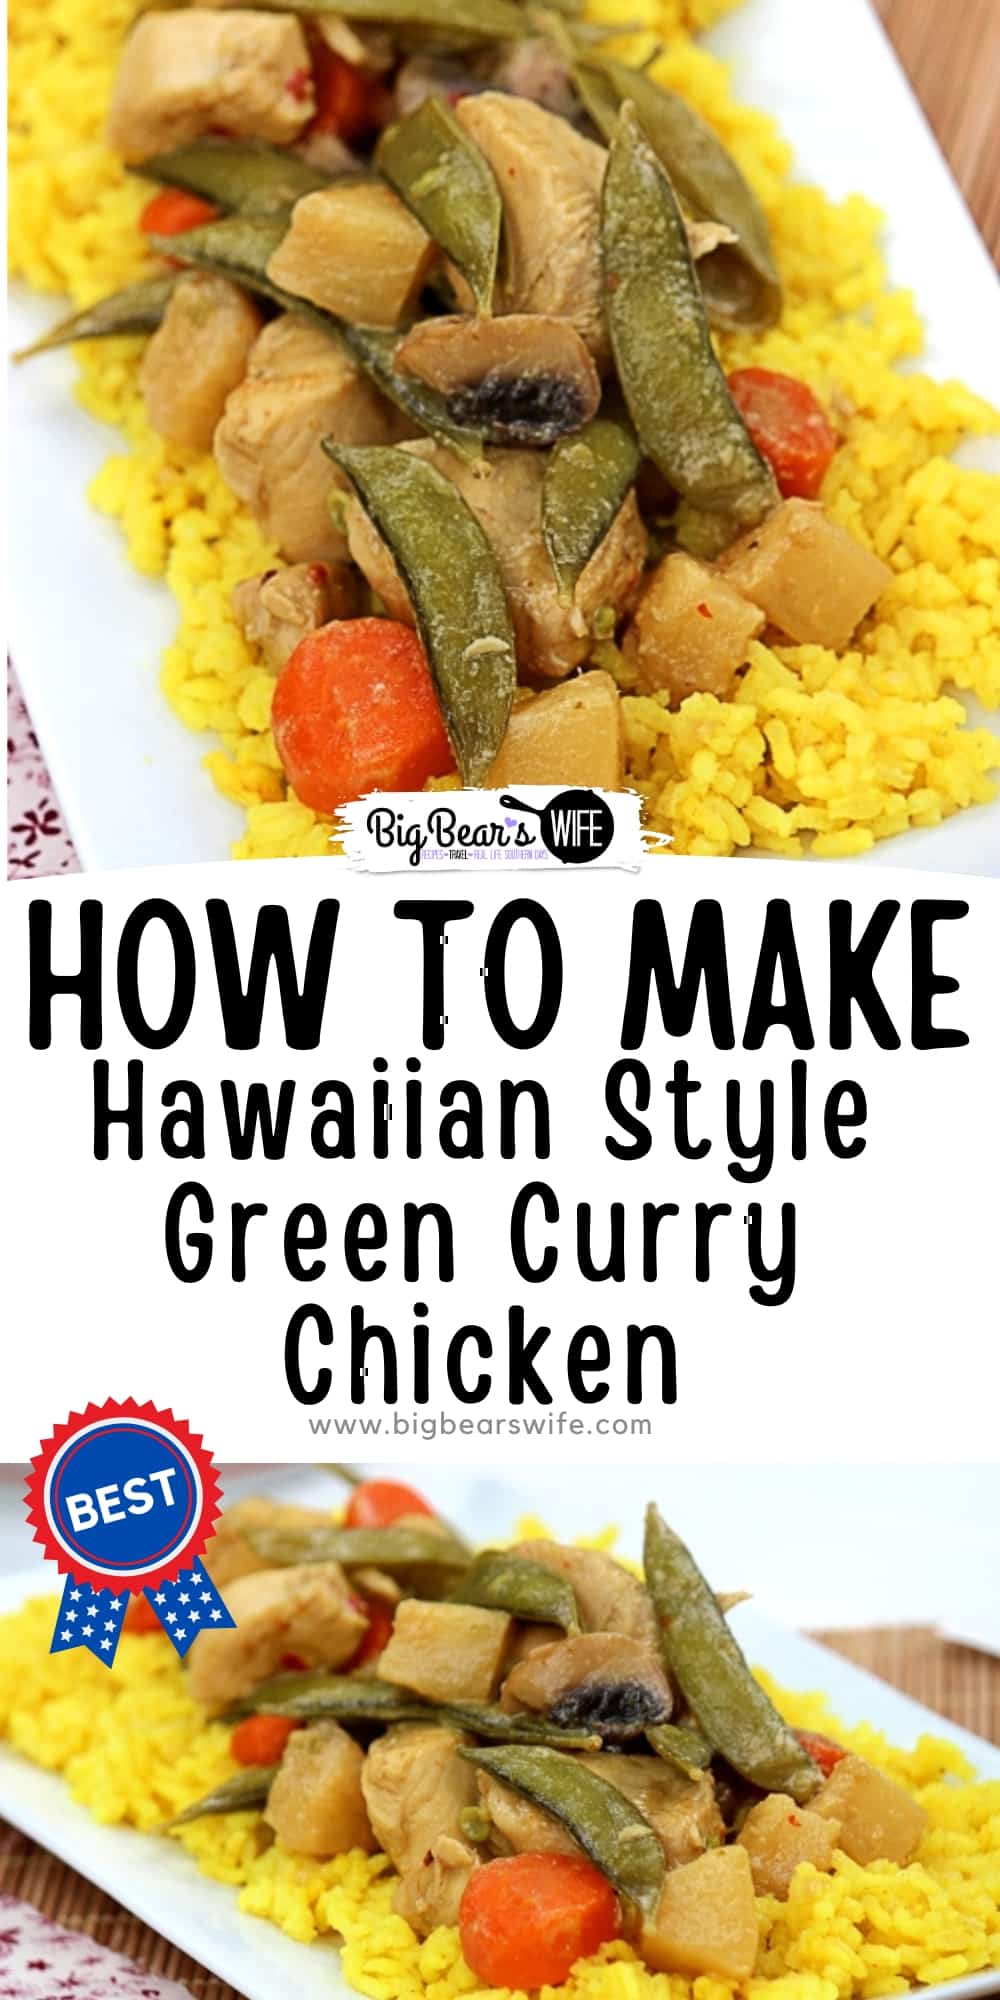 This delicious Hawaiian Style Green Curry Chicken is a healthy chicken recipe that's inspired by the beautiful Hawaiian islands.  via @bigbearswife